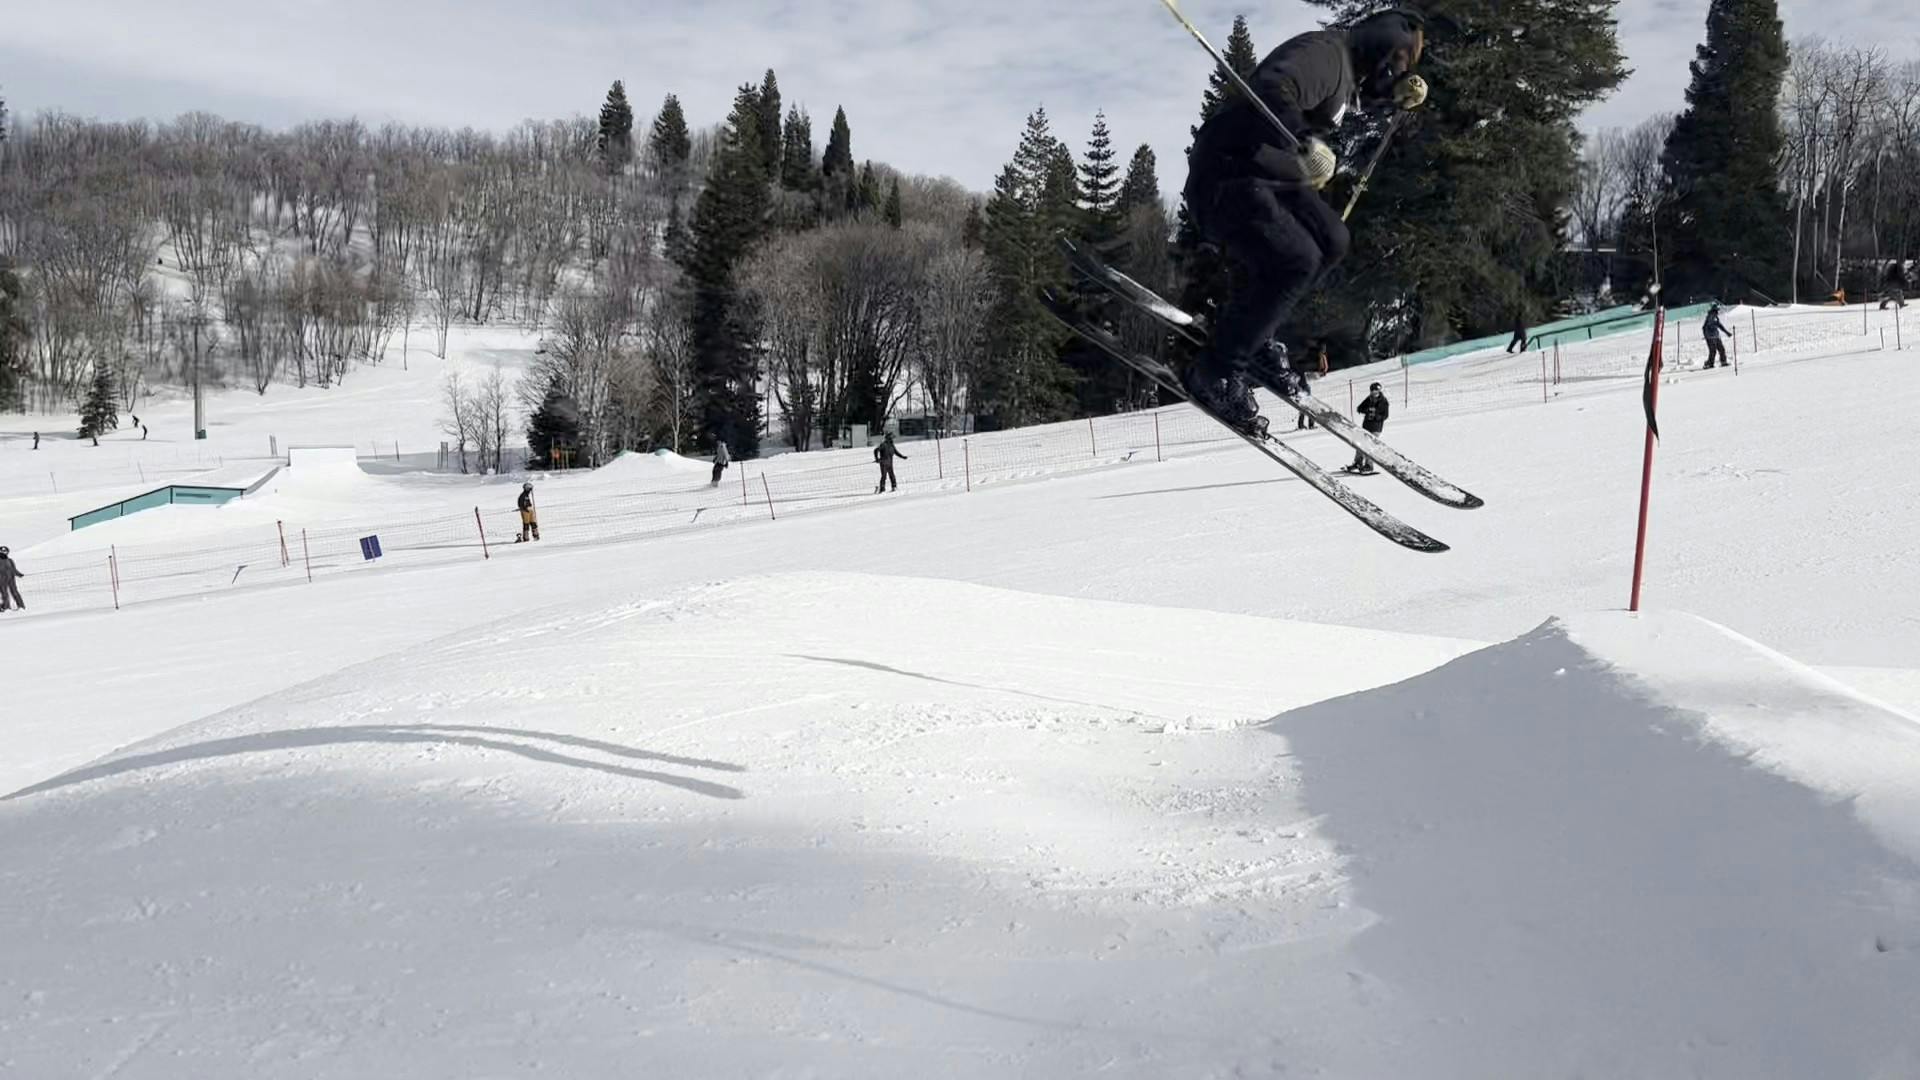 A skier jumping off a park feature on a ski run. 